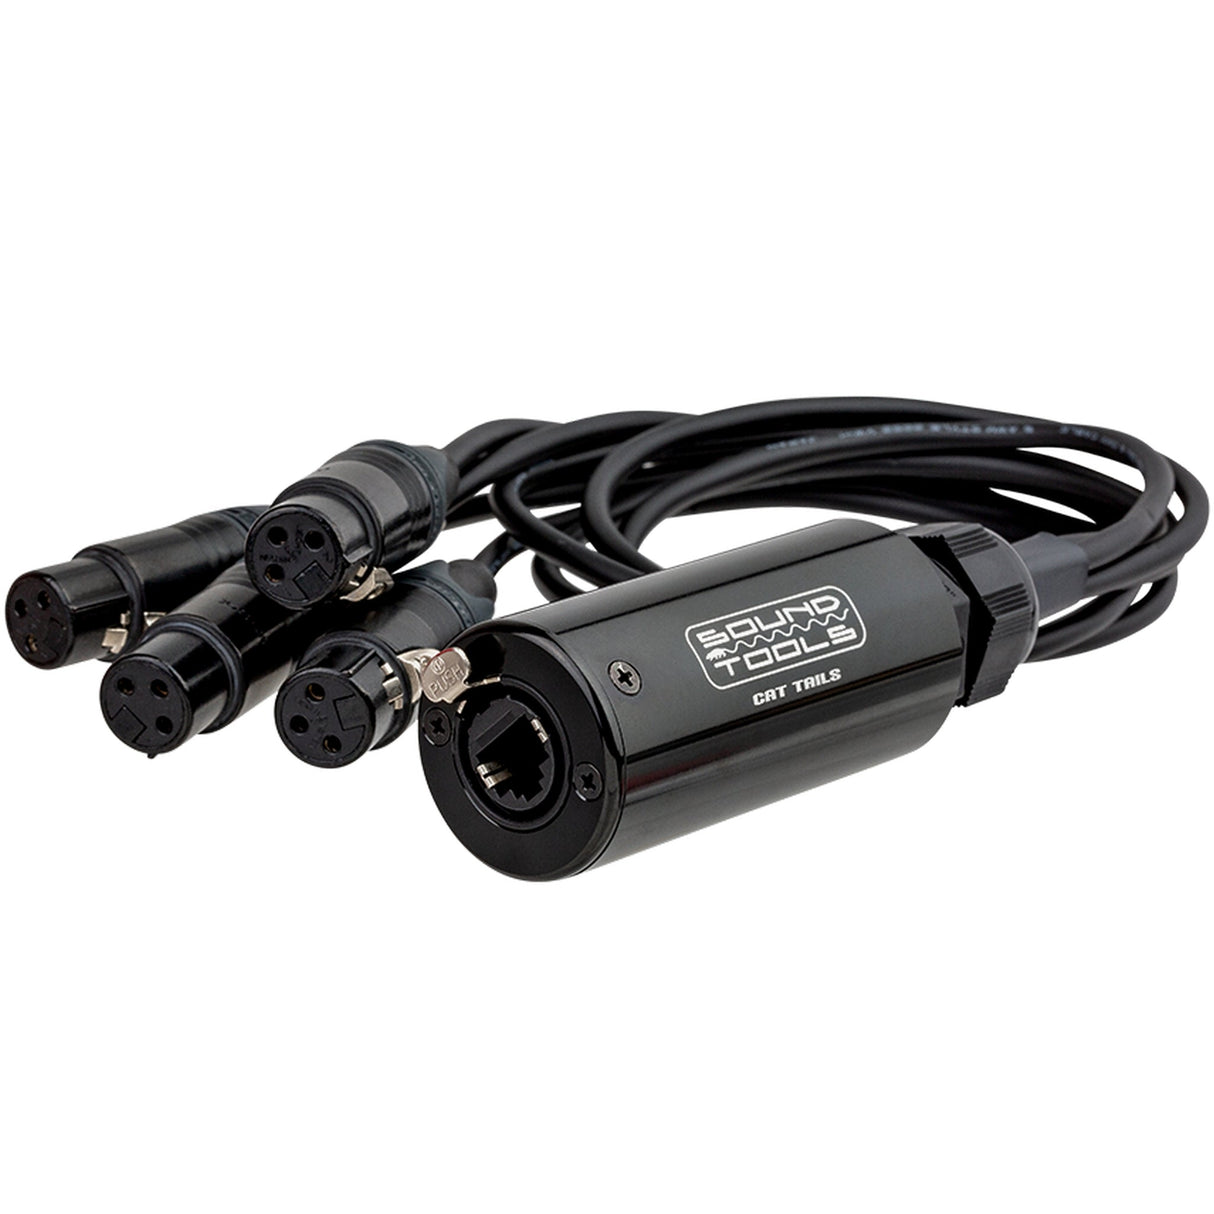 SoundTools CTFMX CAT Tails 2-Female XLR and 2-Male XLR Breakout Tails to Female etherCON, 24-Inch